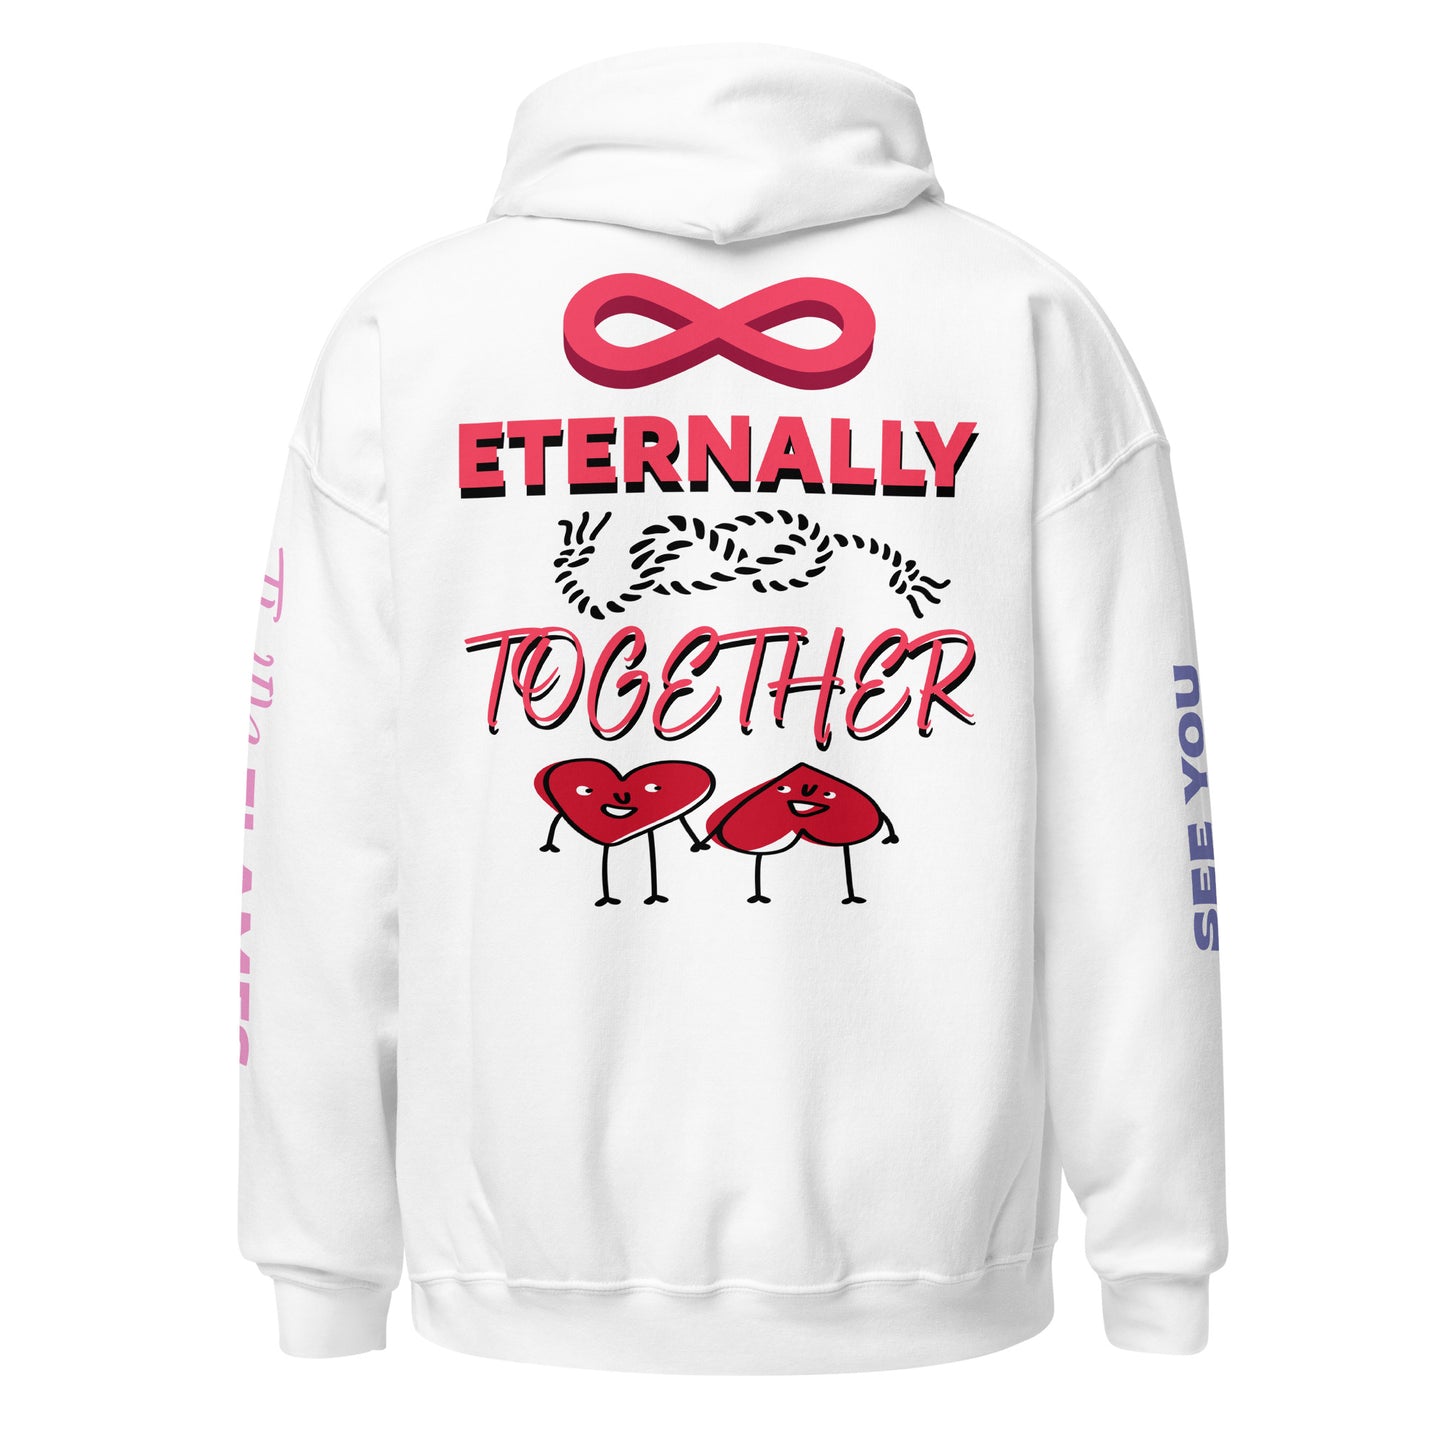 Best matching hoodies for couples. White unisex hoodies with graphic design for couples eternally together. Gildan hoodies with messages on the back. Cute hoodies for twin flames with infinity symbol, a rope tied in an infinity knot, the words "ETERNALLY TOGETHER," and two lovers as red hearts looking at each other and holding hands. Made with 50% cotton/50% polyester. Sizes S-5X. Cheap hoodies online. Shop online sale at JAMILLIAH'S WISDOM IS TIMELESS SHOP - wisdomistimeless.com. 